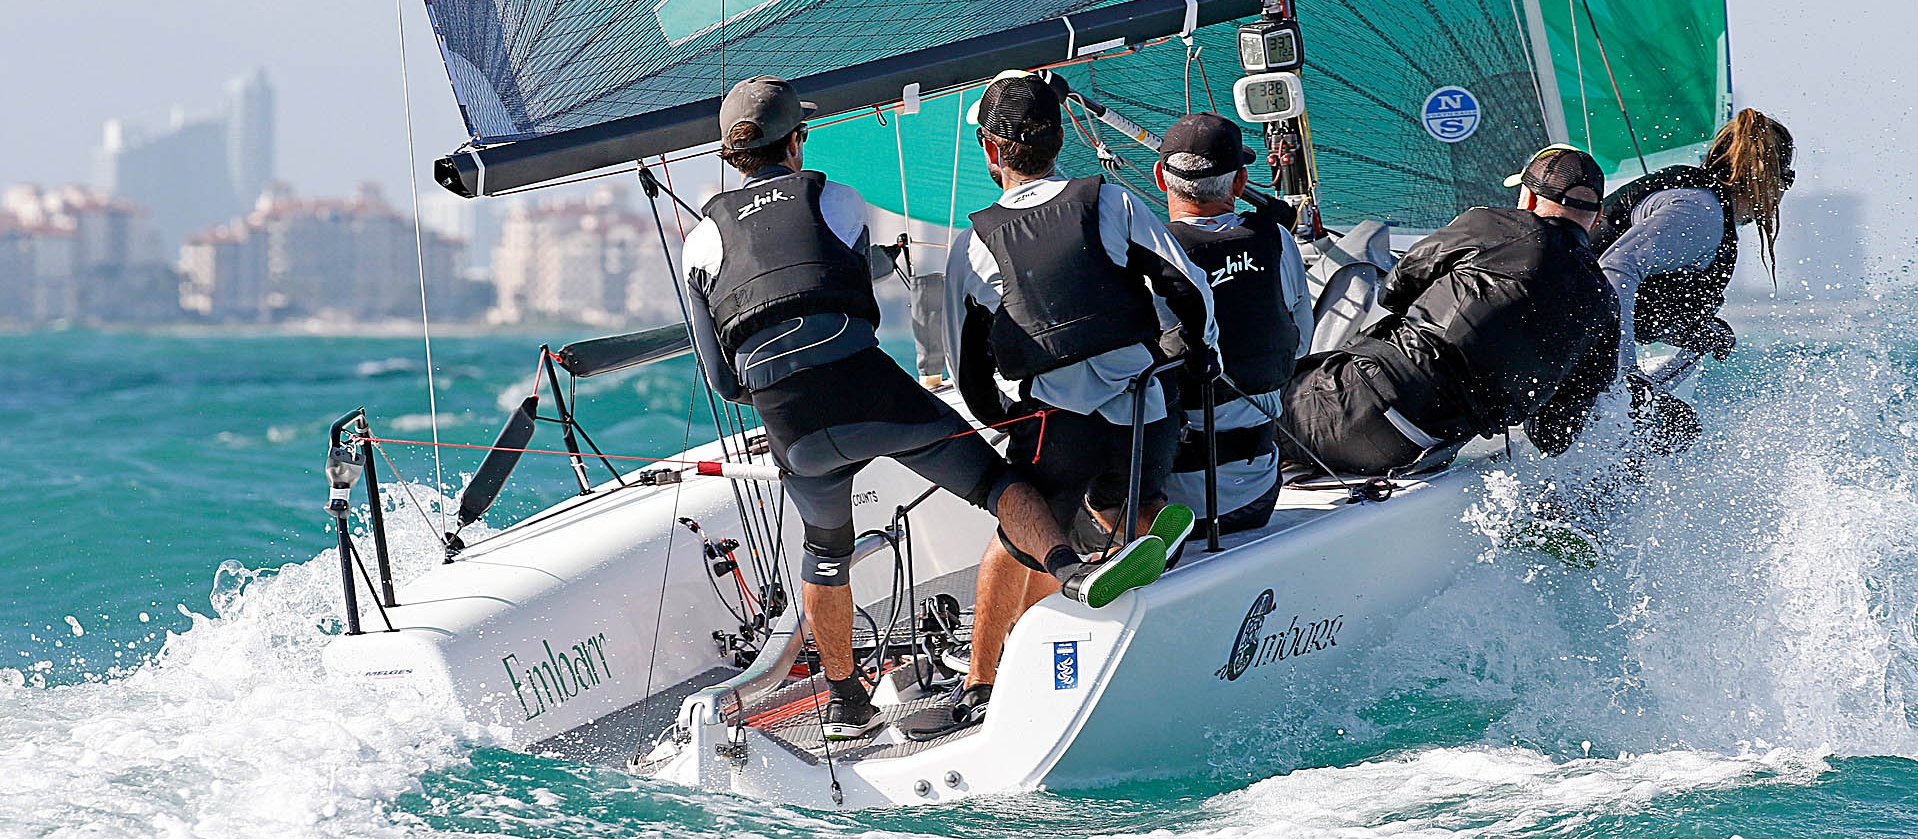 Embarr IRL829 of Conor Clarke - 2016 Melges 24 World Champion at the World Championship in Miami, USA